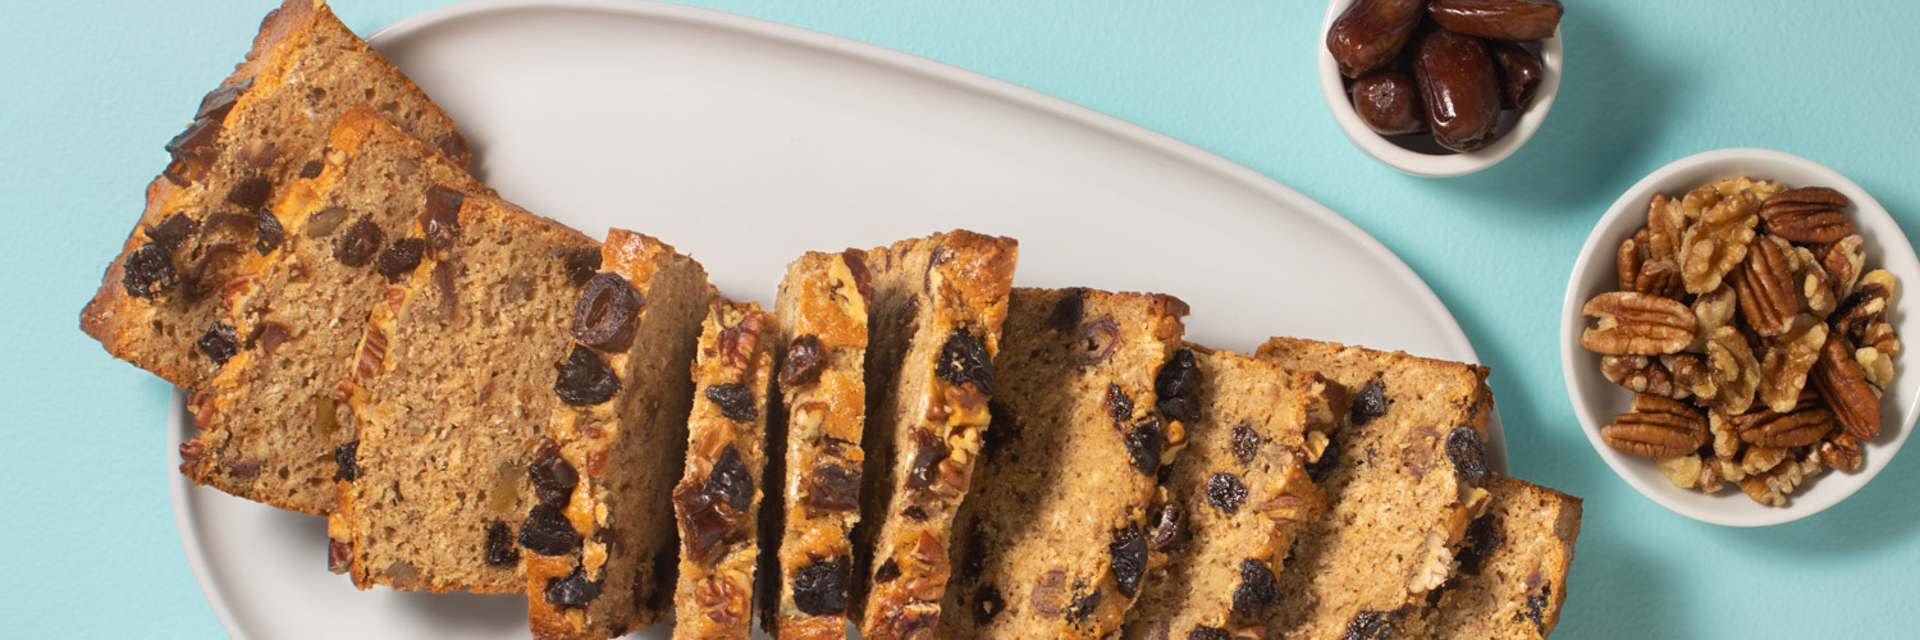 Combining prunes, dates, and nuts together in a spiced quickbread is a way to offer an afternoon pick-me-up that comes with the benefit providing fiber and tangy sweetness from the dried fruit.